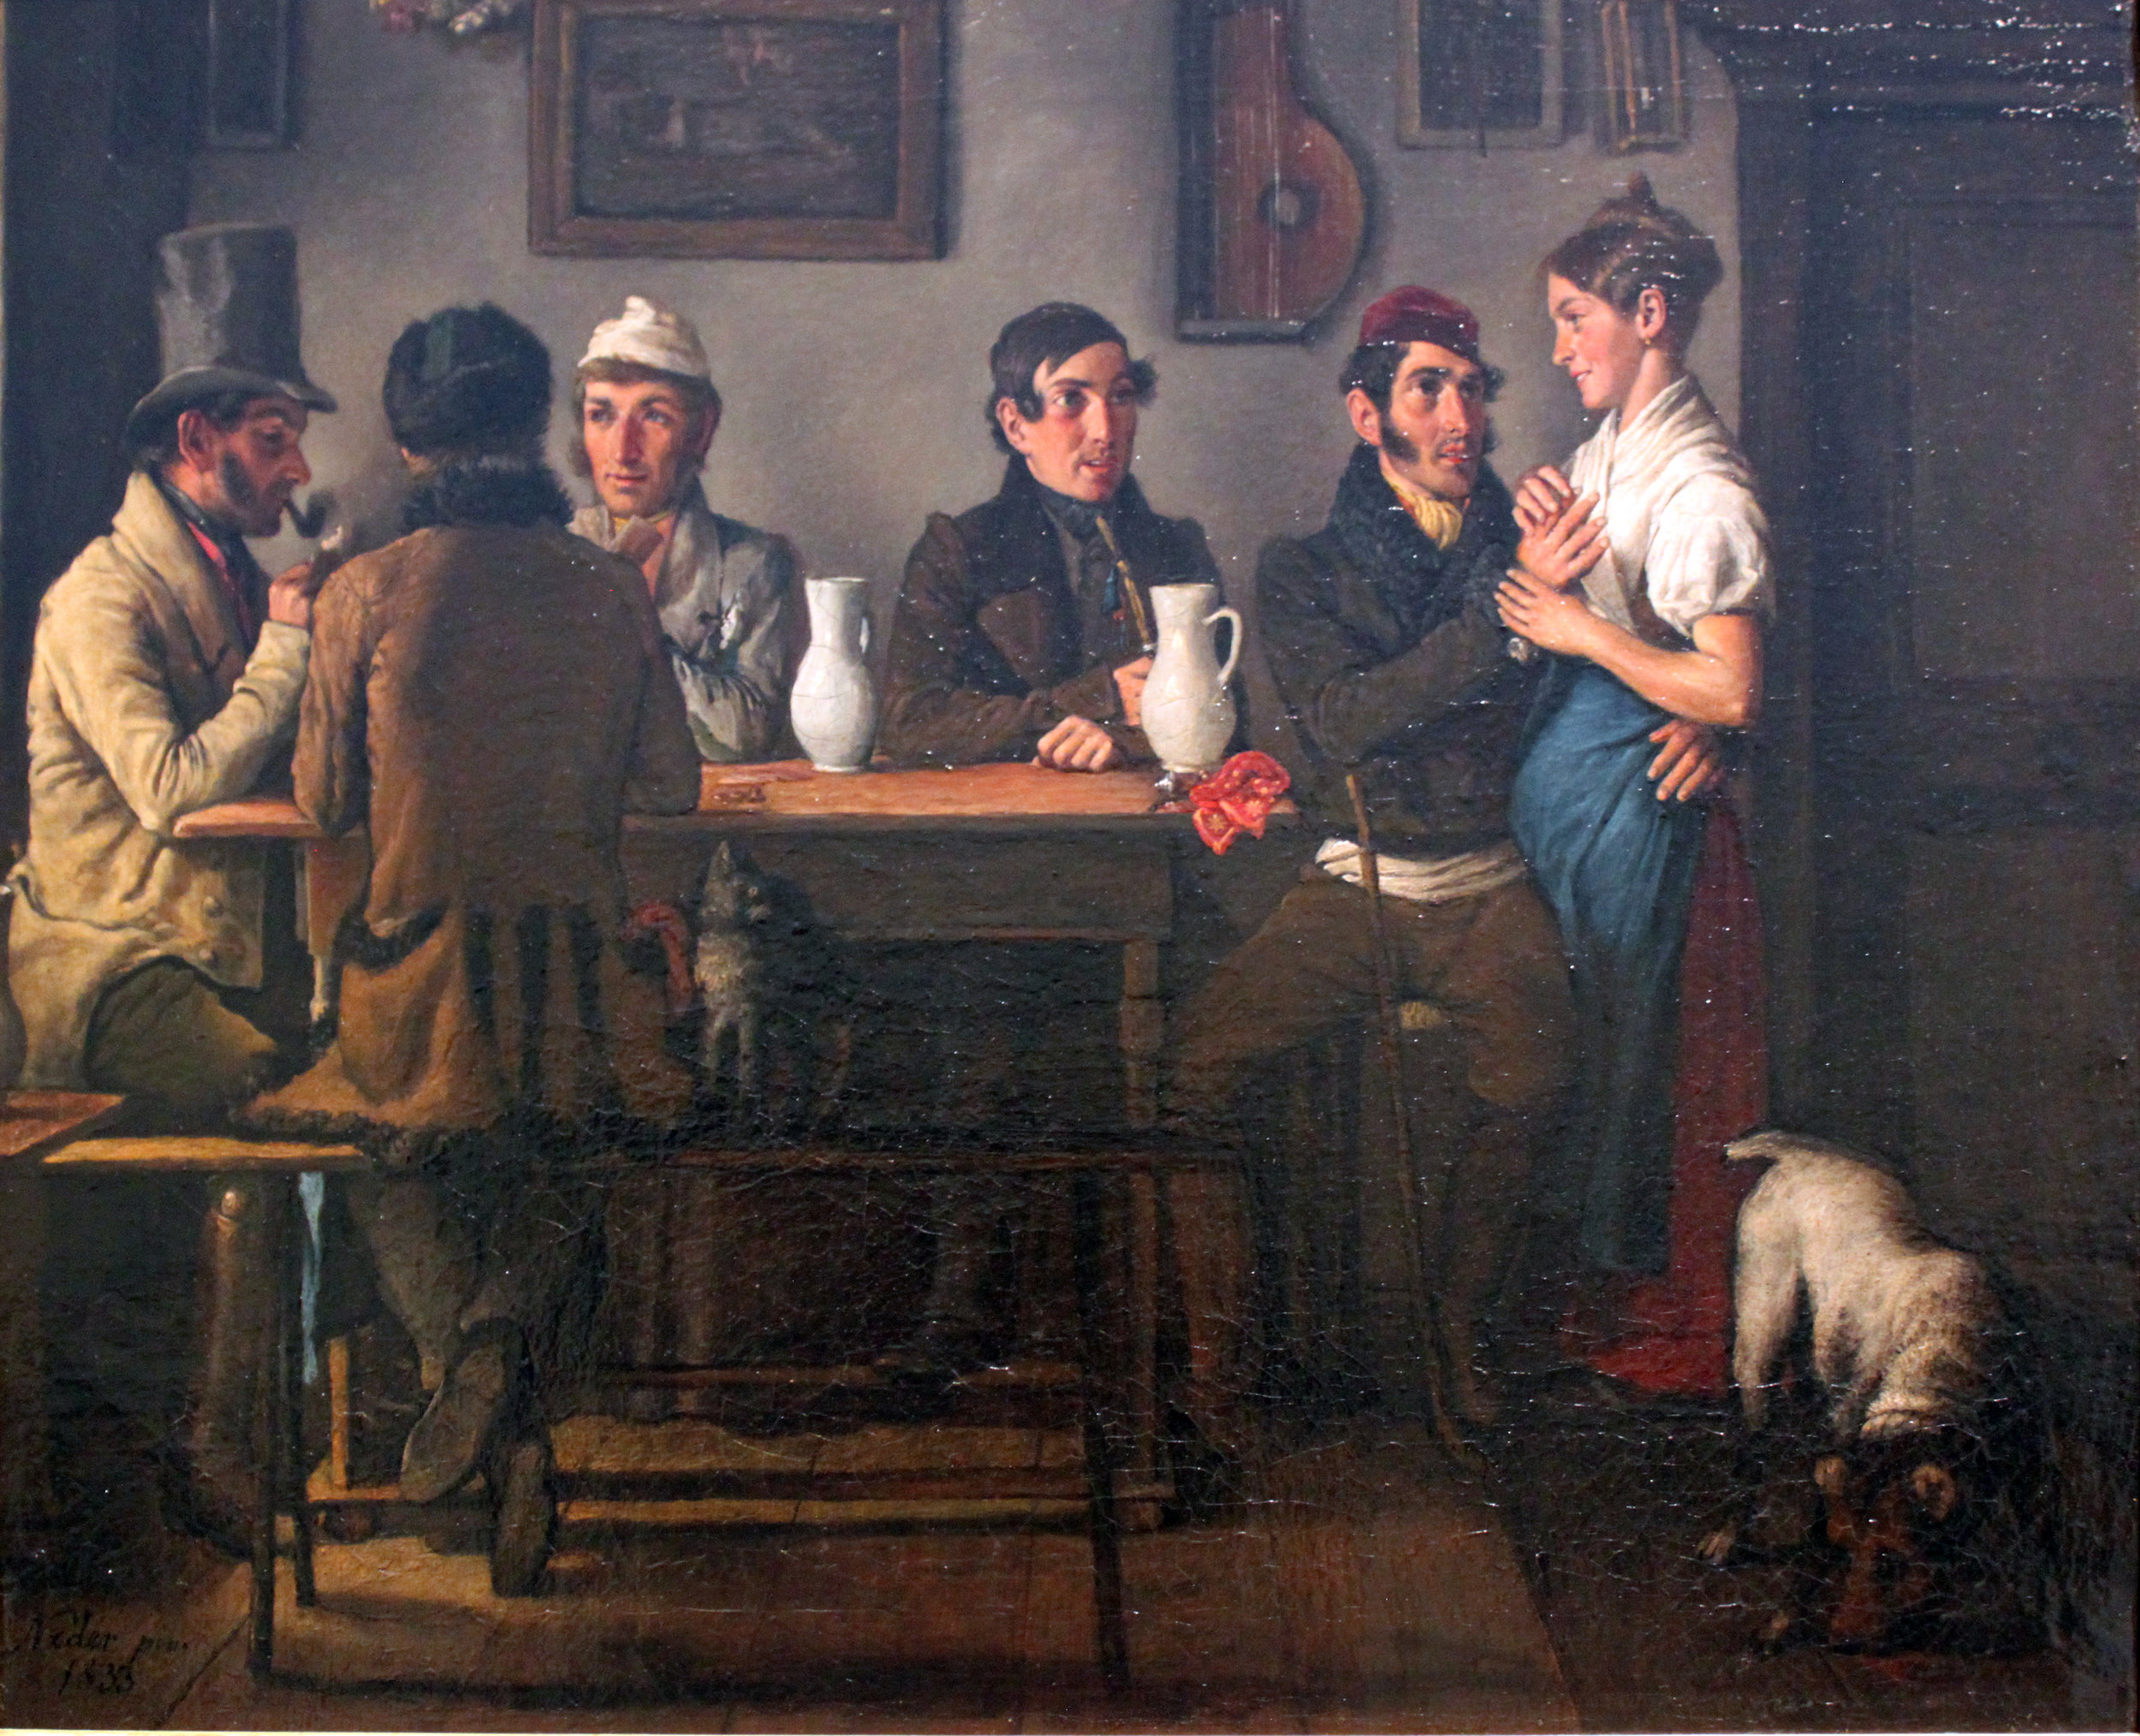  "At the Tavern" 1833 painting by Johann Michael Neder 